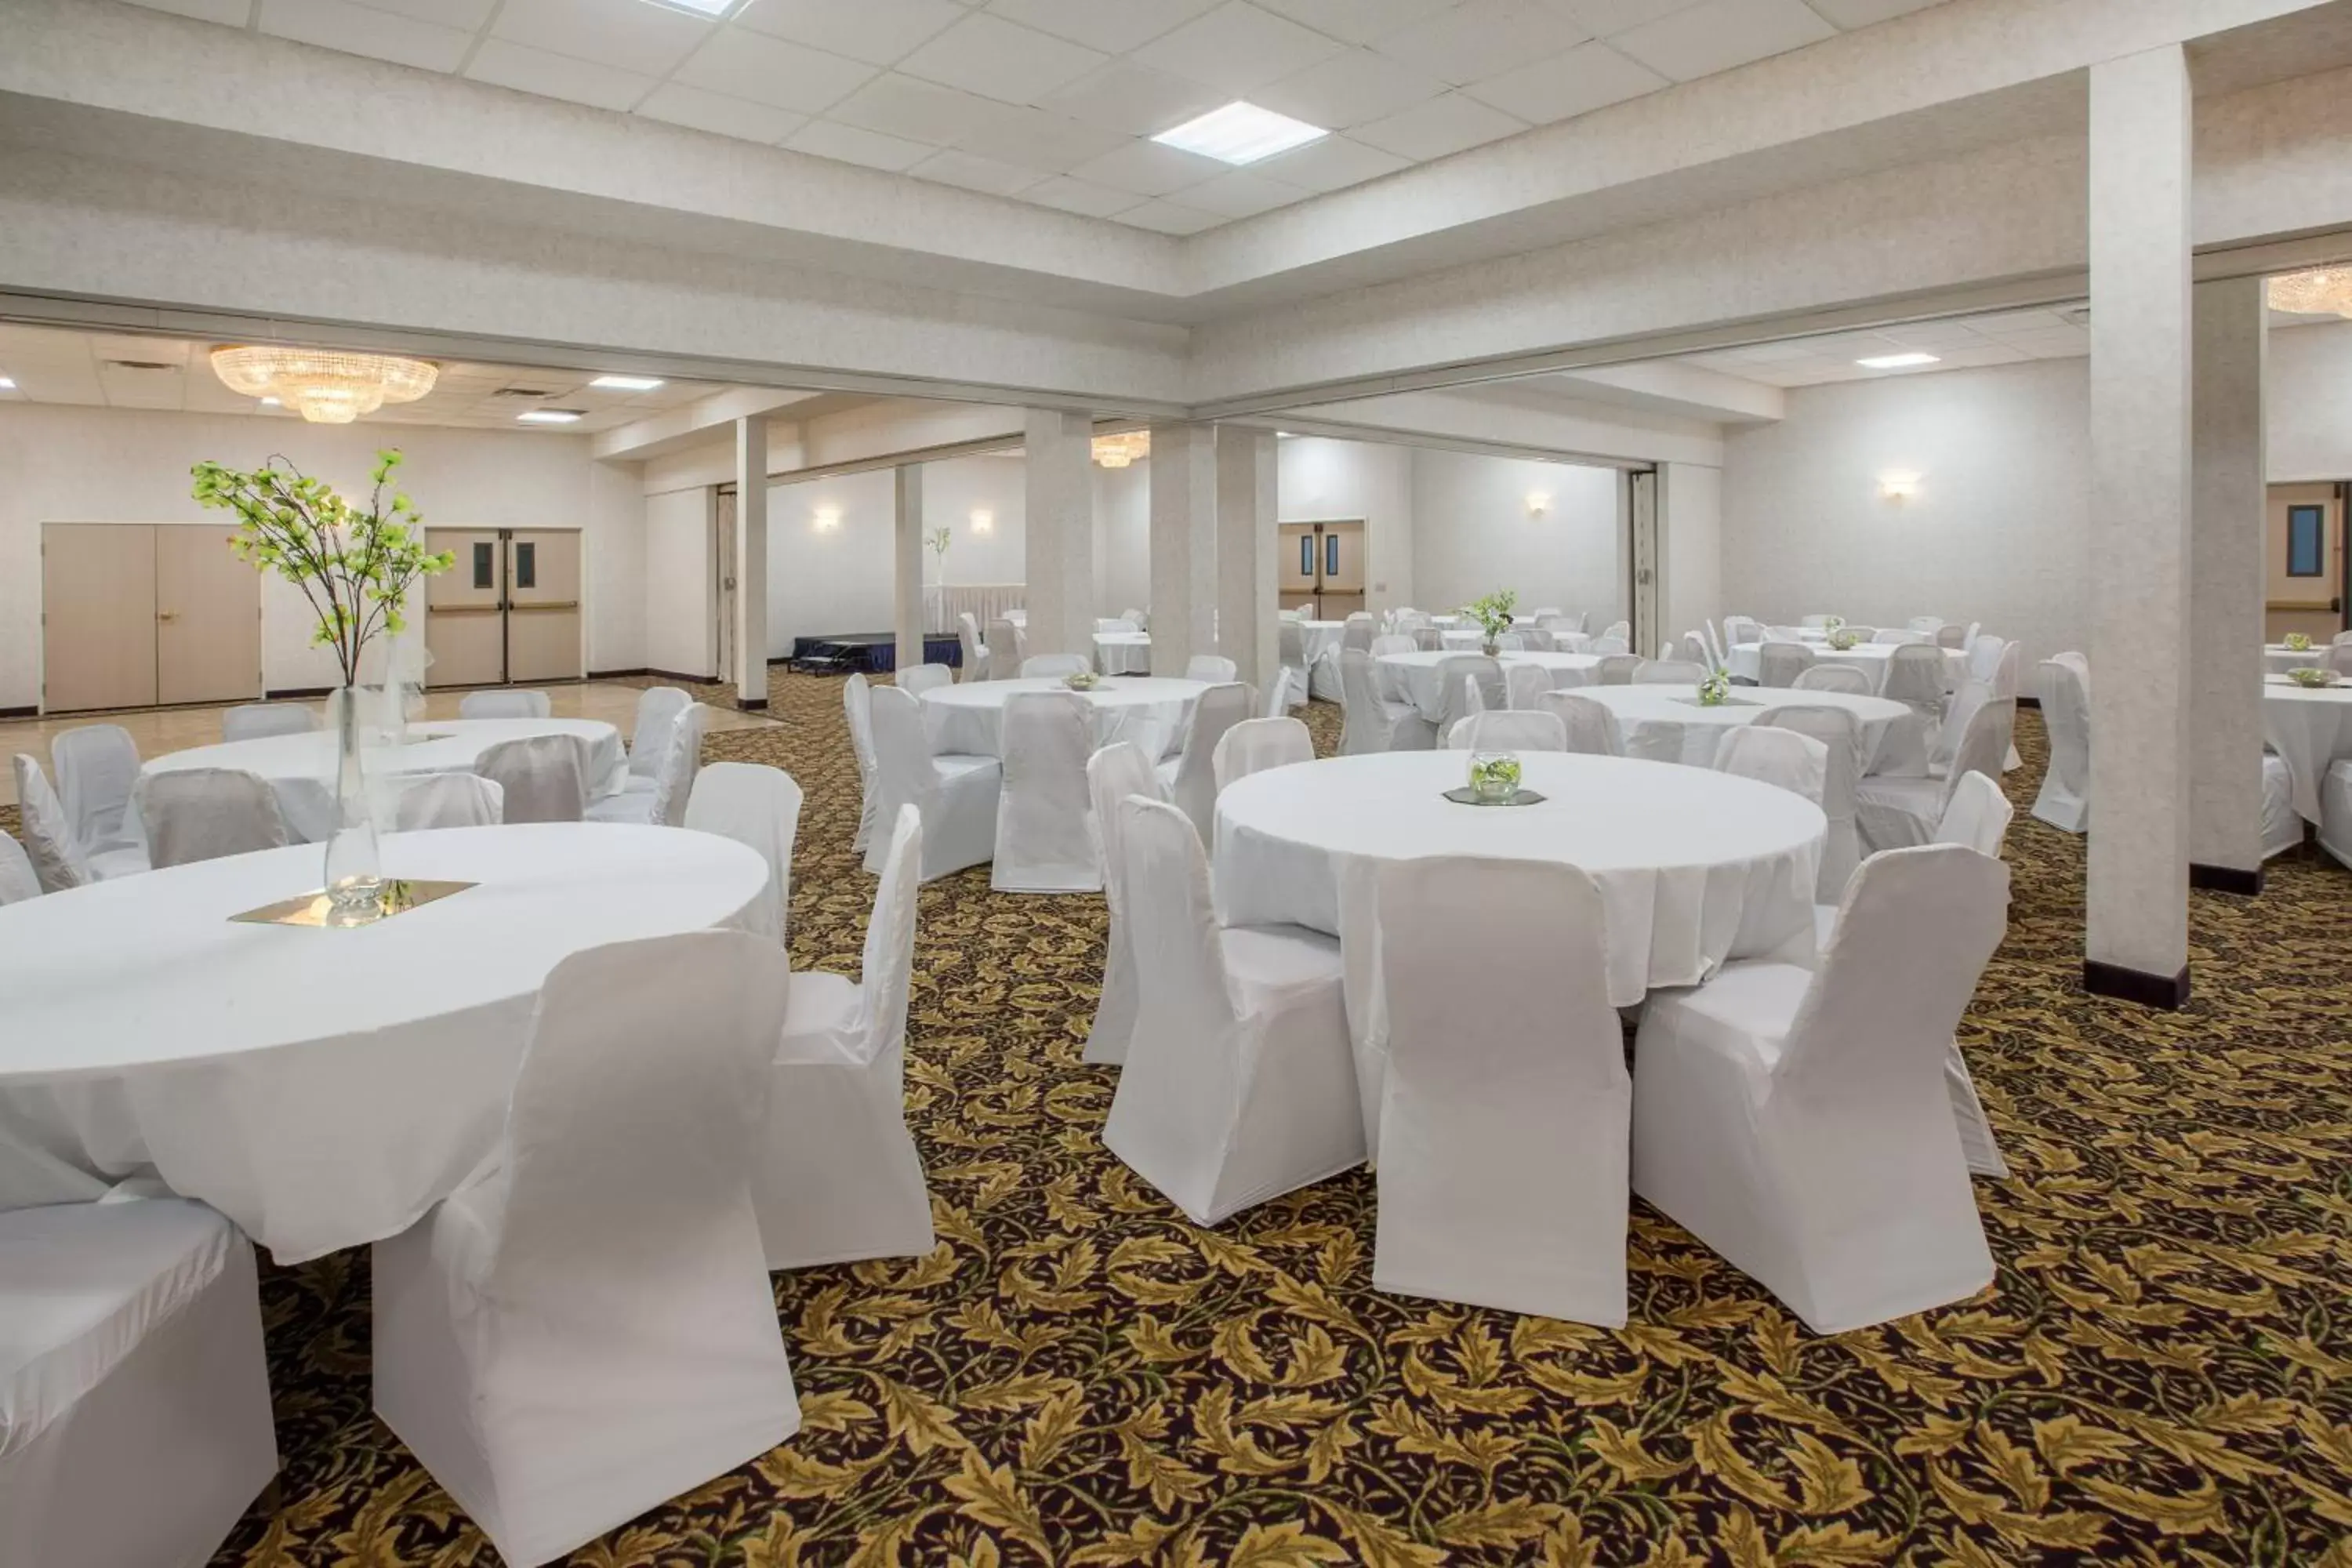 Banquet/Function facilities, Banquet Facilities in Baymont by Wyndham South Haven